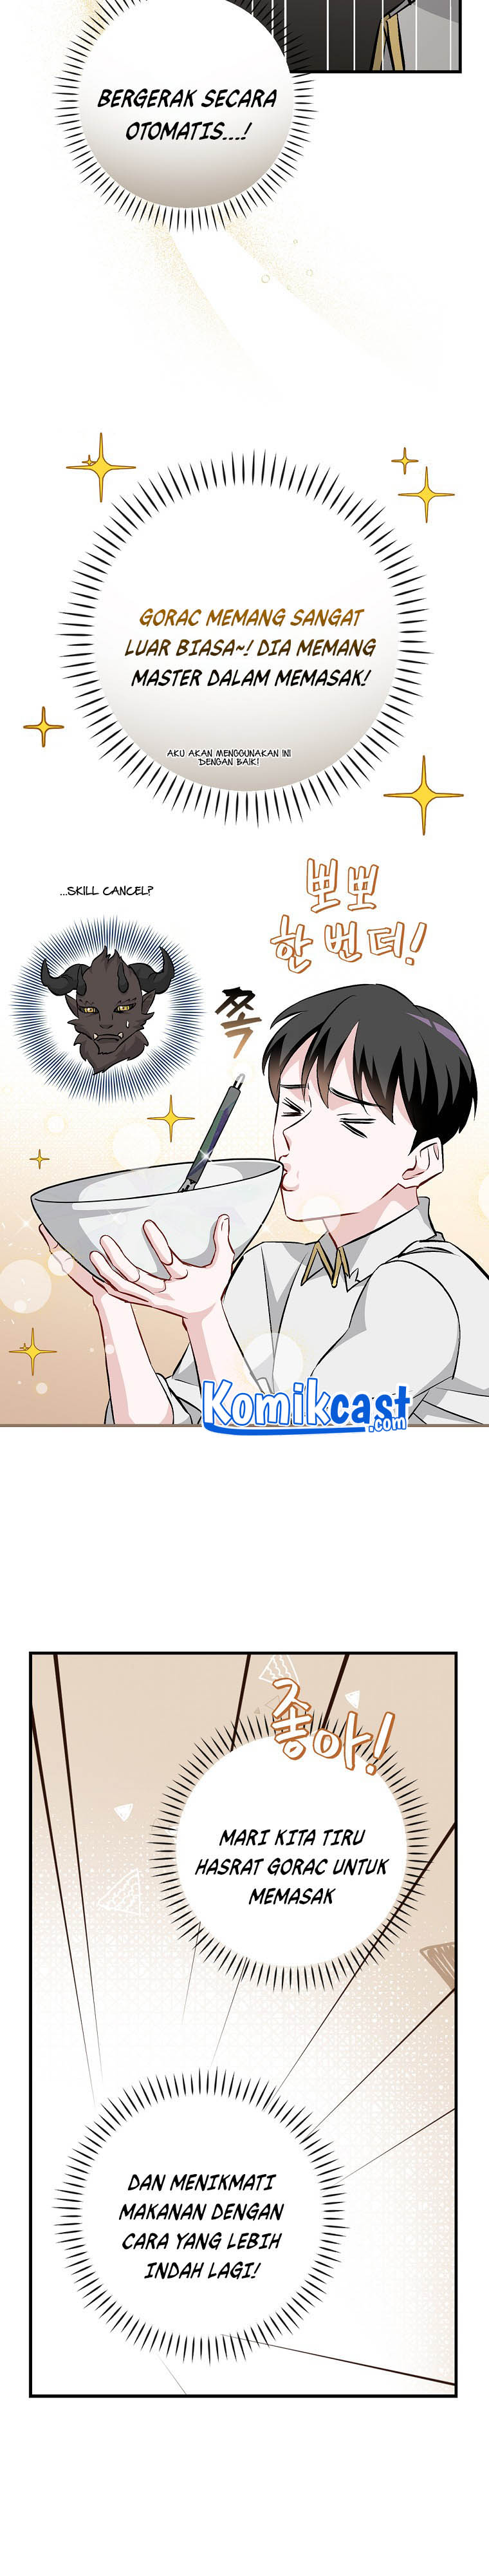 Leveling Up, By Only Eating! (Gourmet Gaming) Chapter 96 - 219